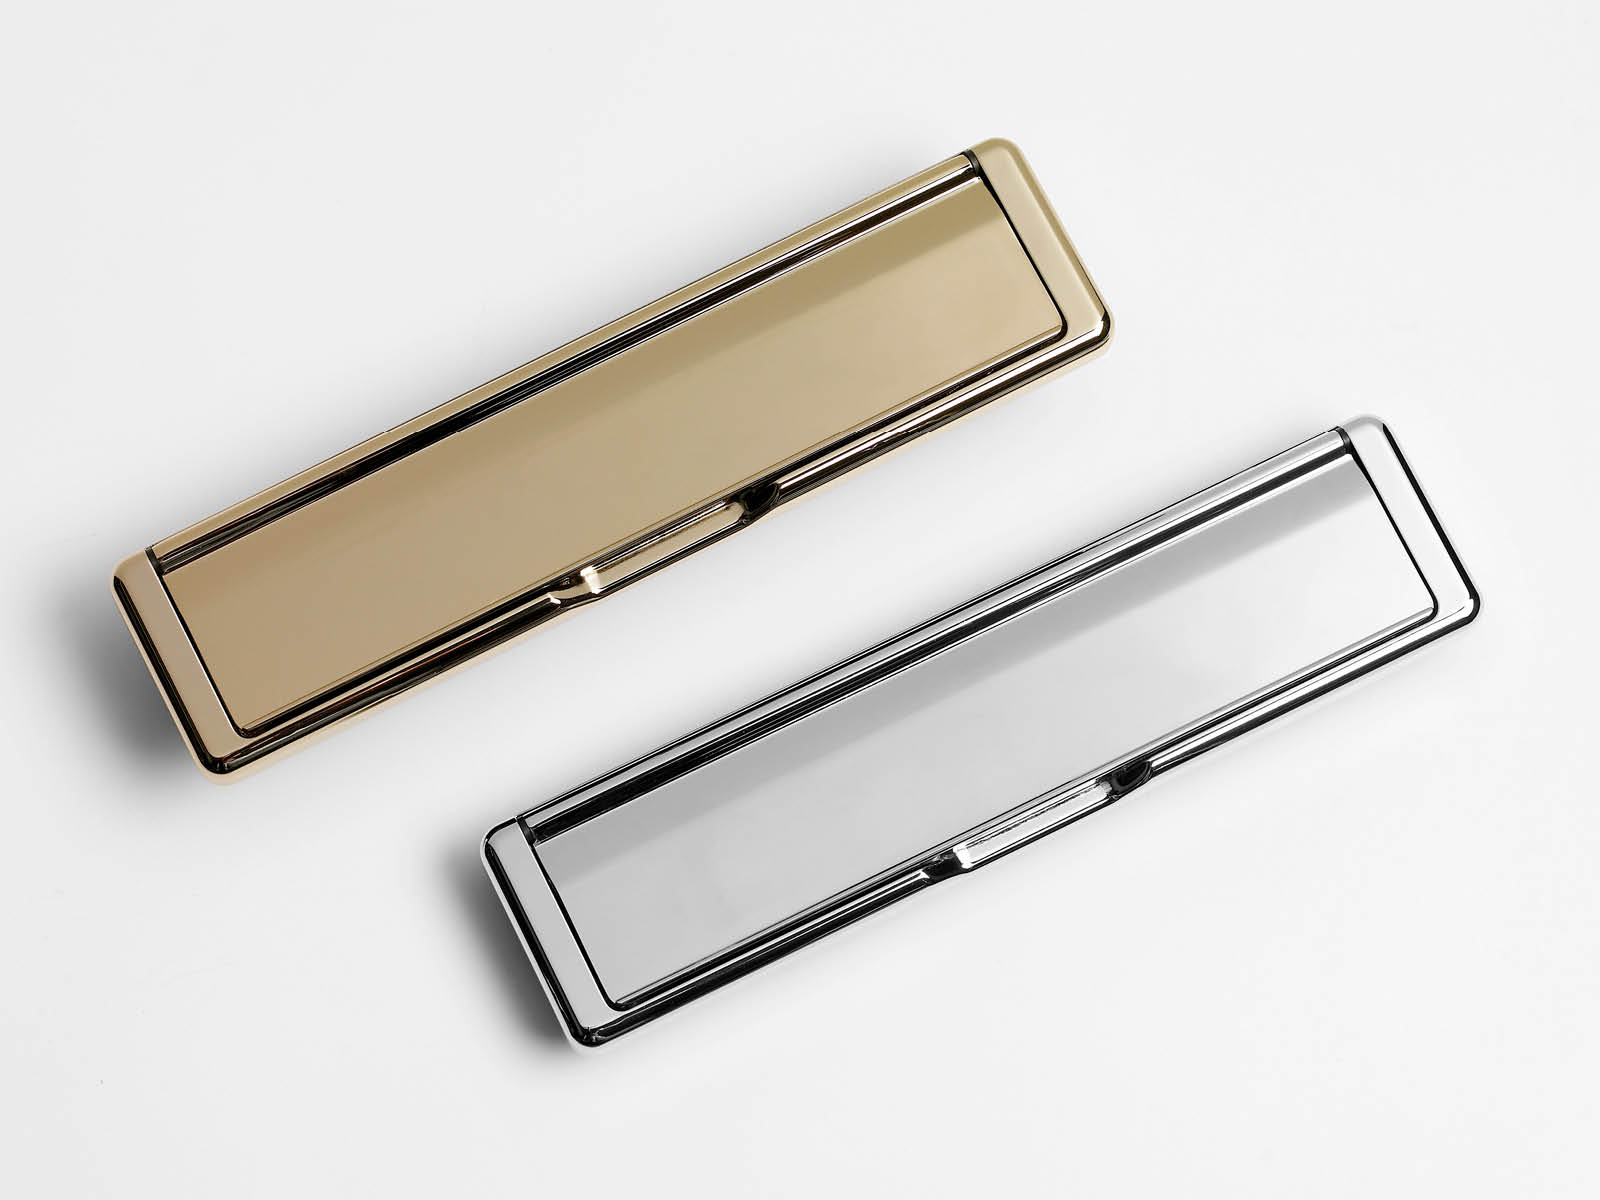 letterbox colour door furniture options showing gold and silver